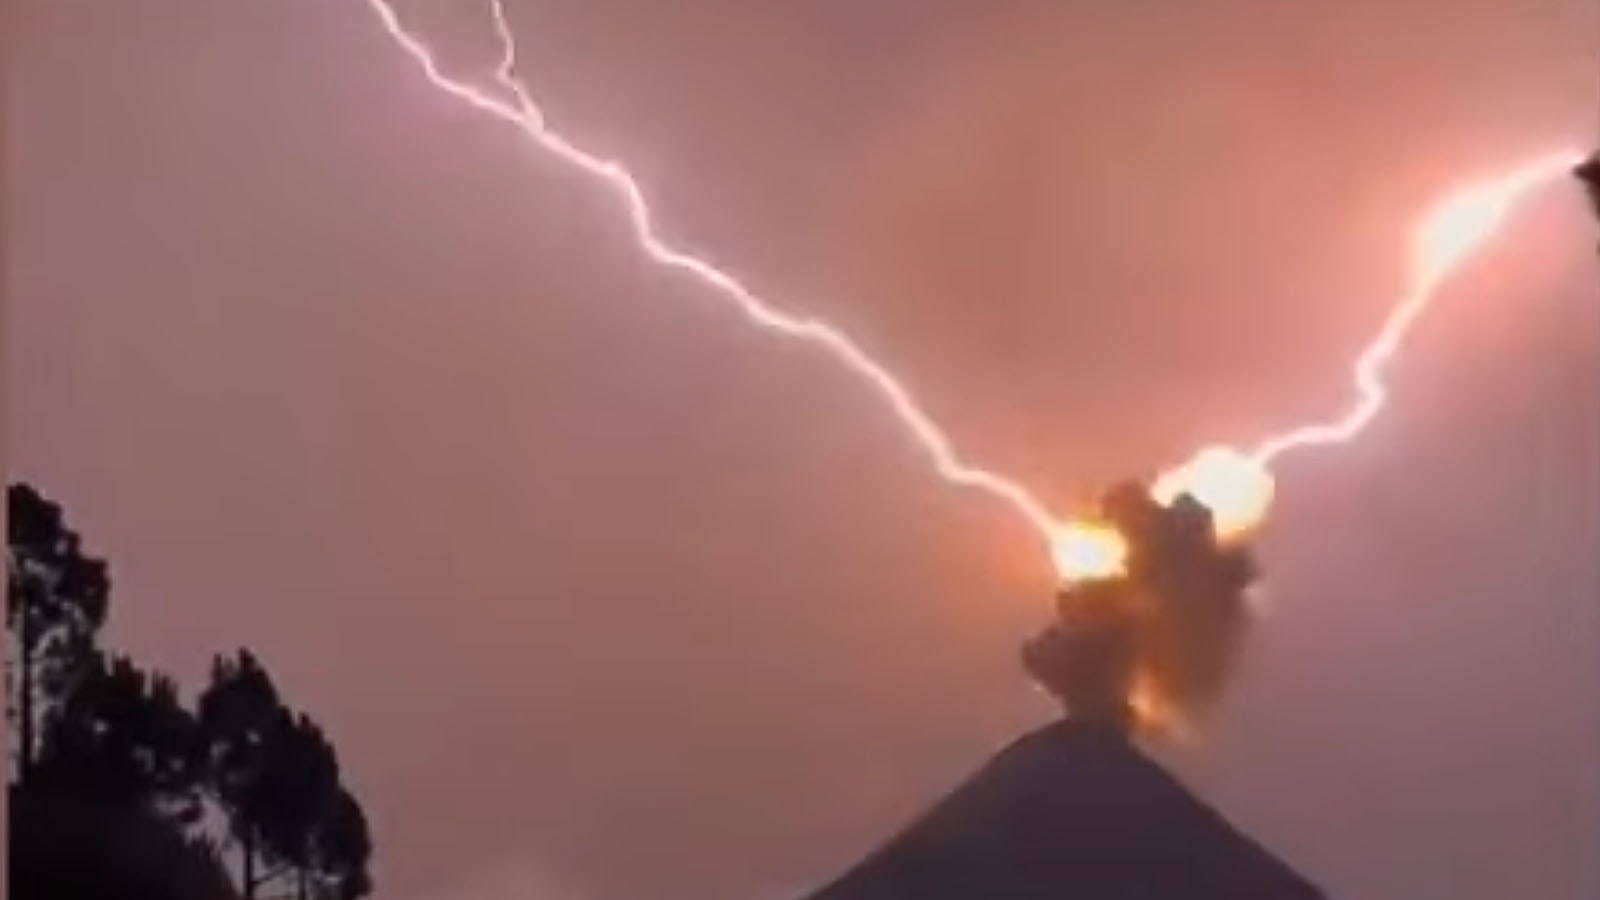 Images from a viral video showing lightning striking an erupting volcano in Guatemala.